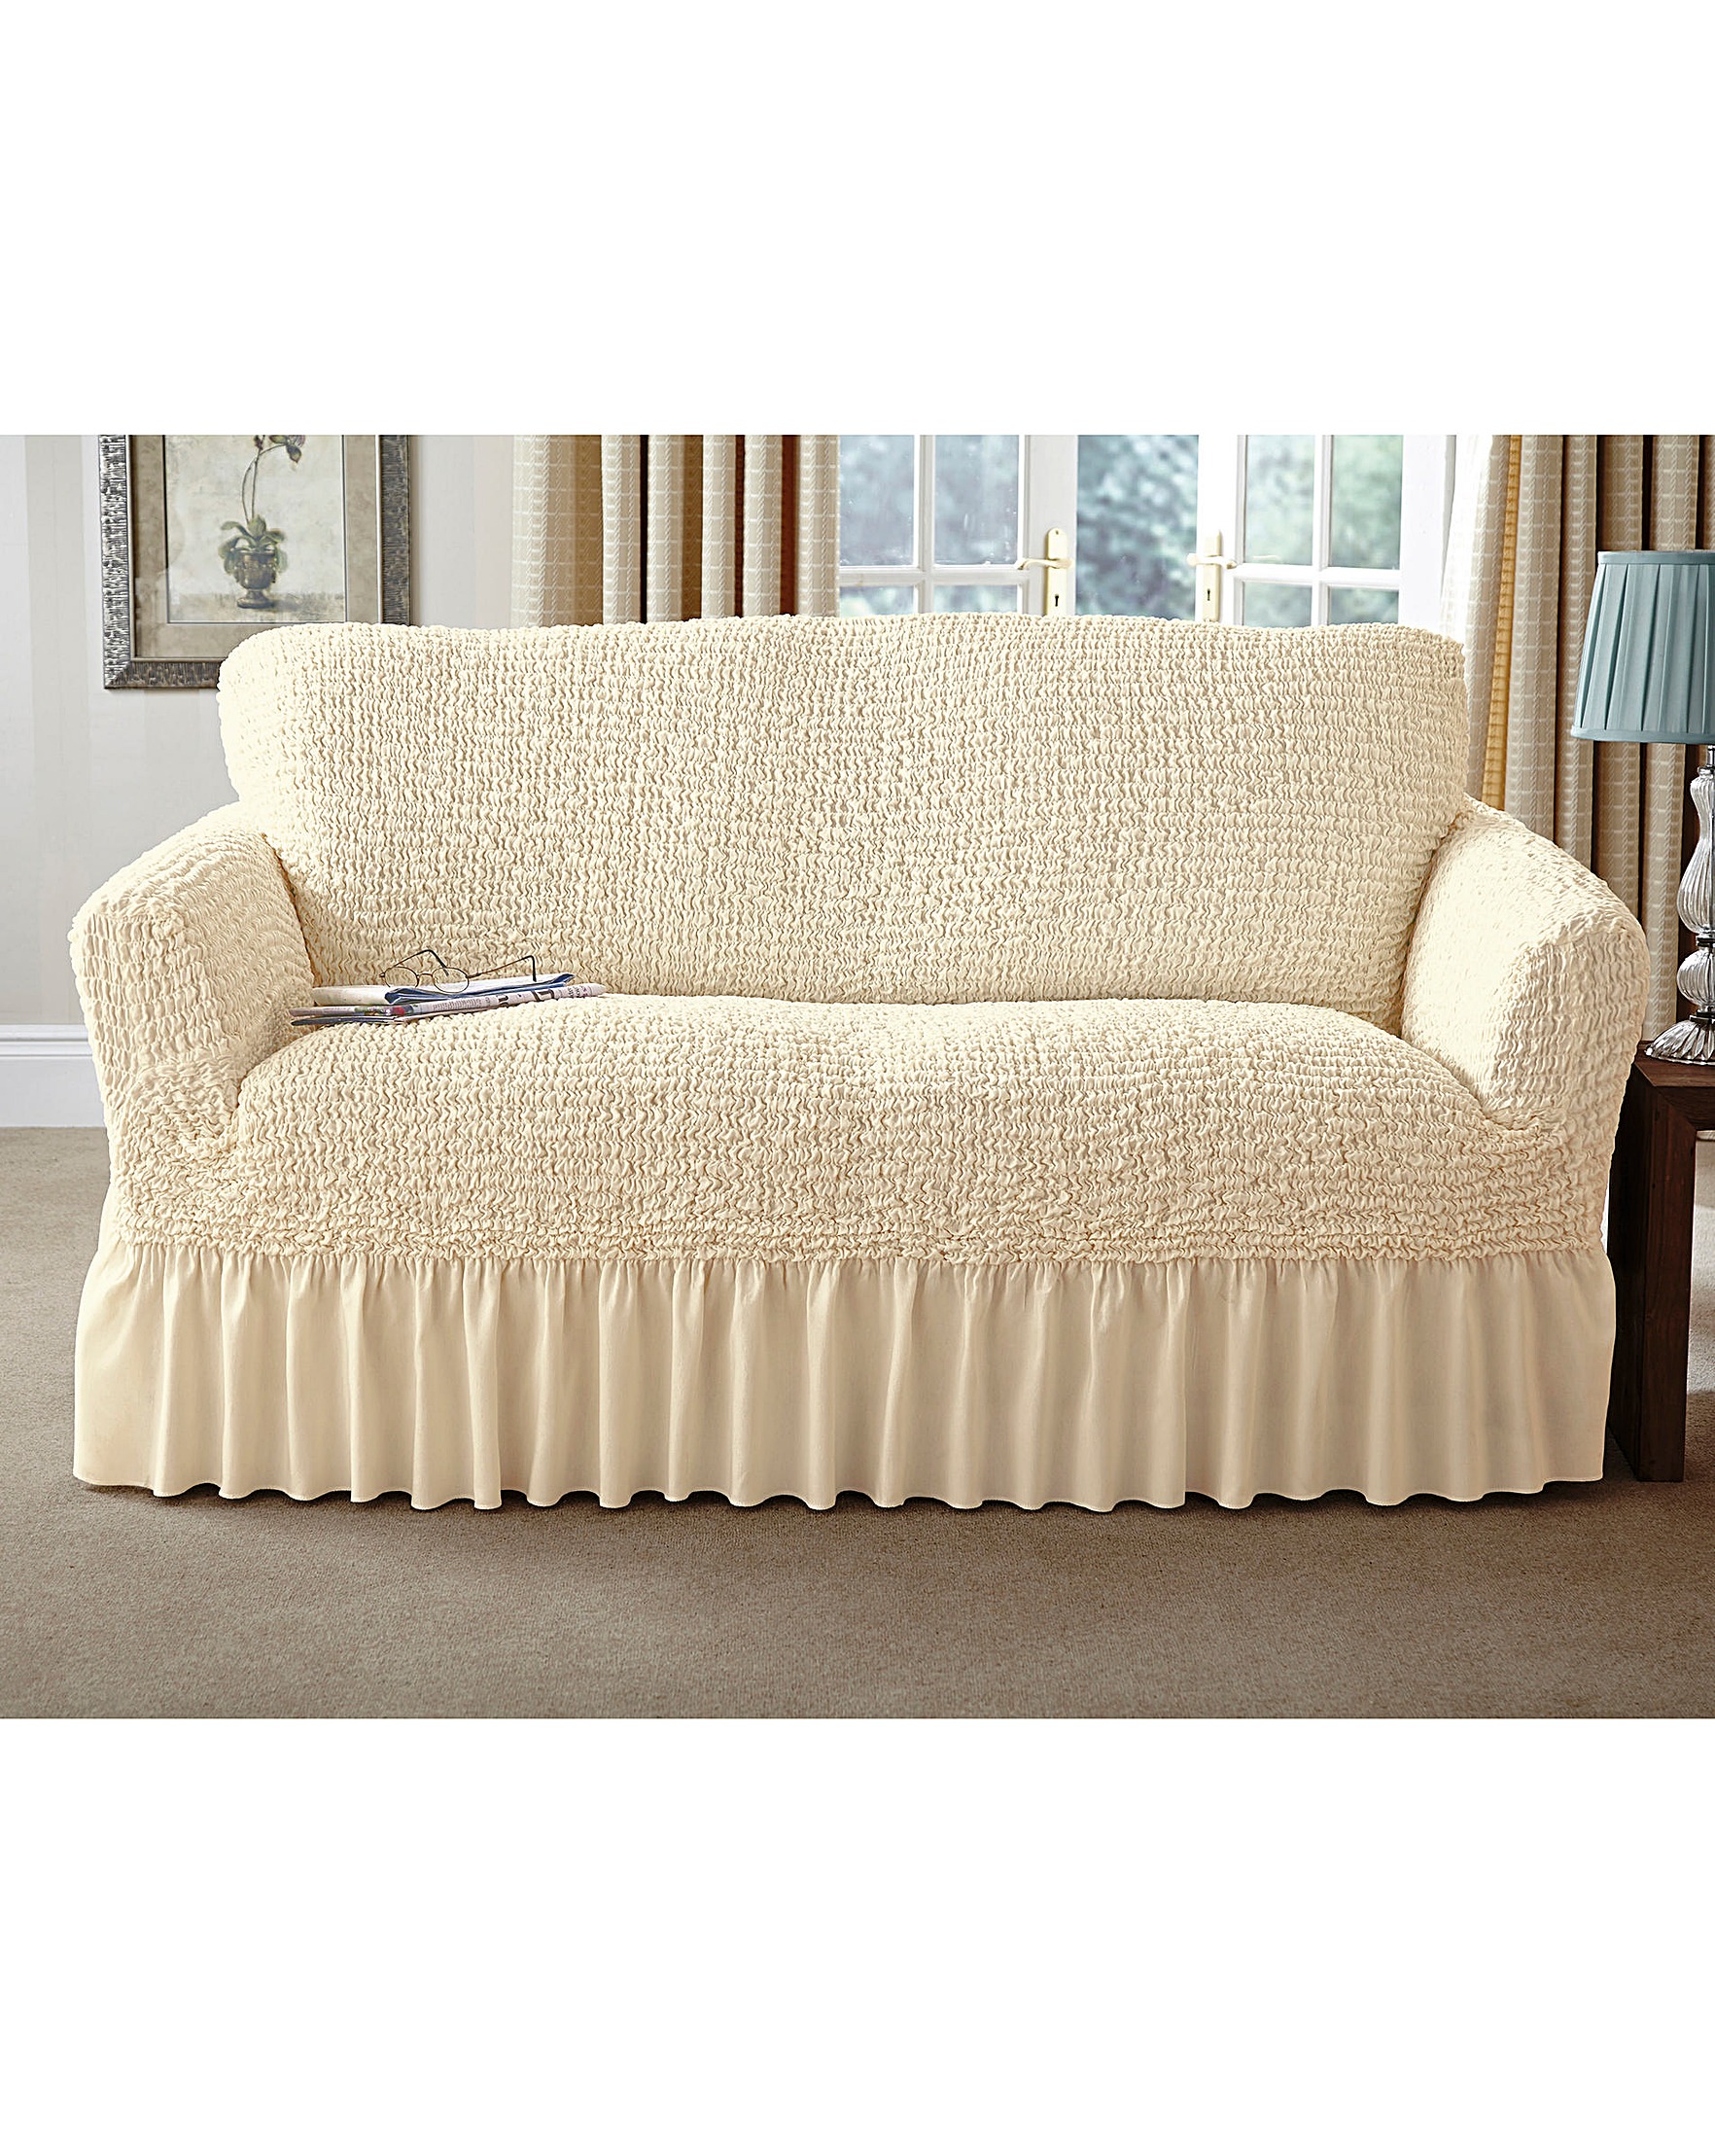 Stretch Furniture Covers With Valance House Of Bath